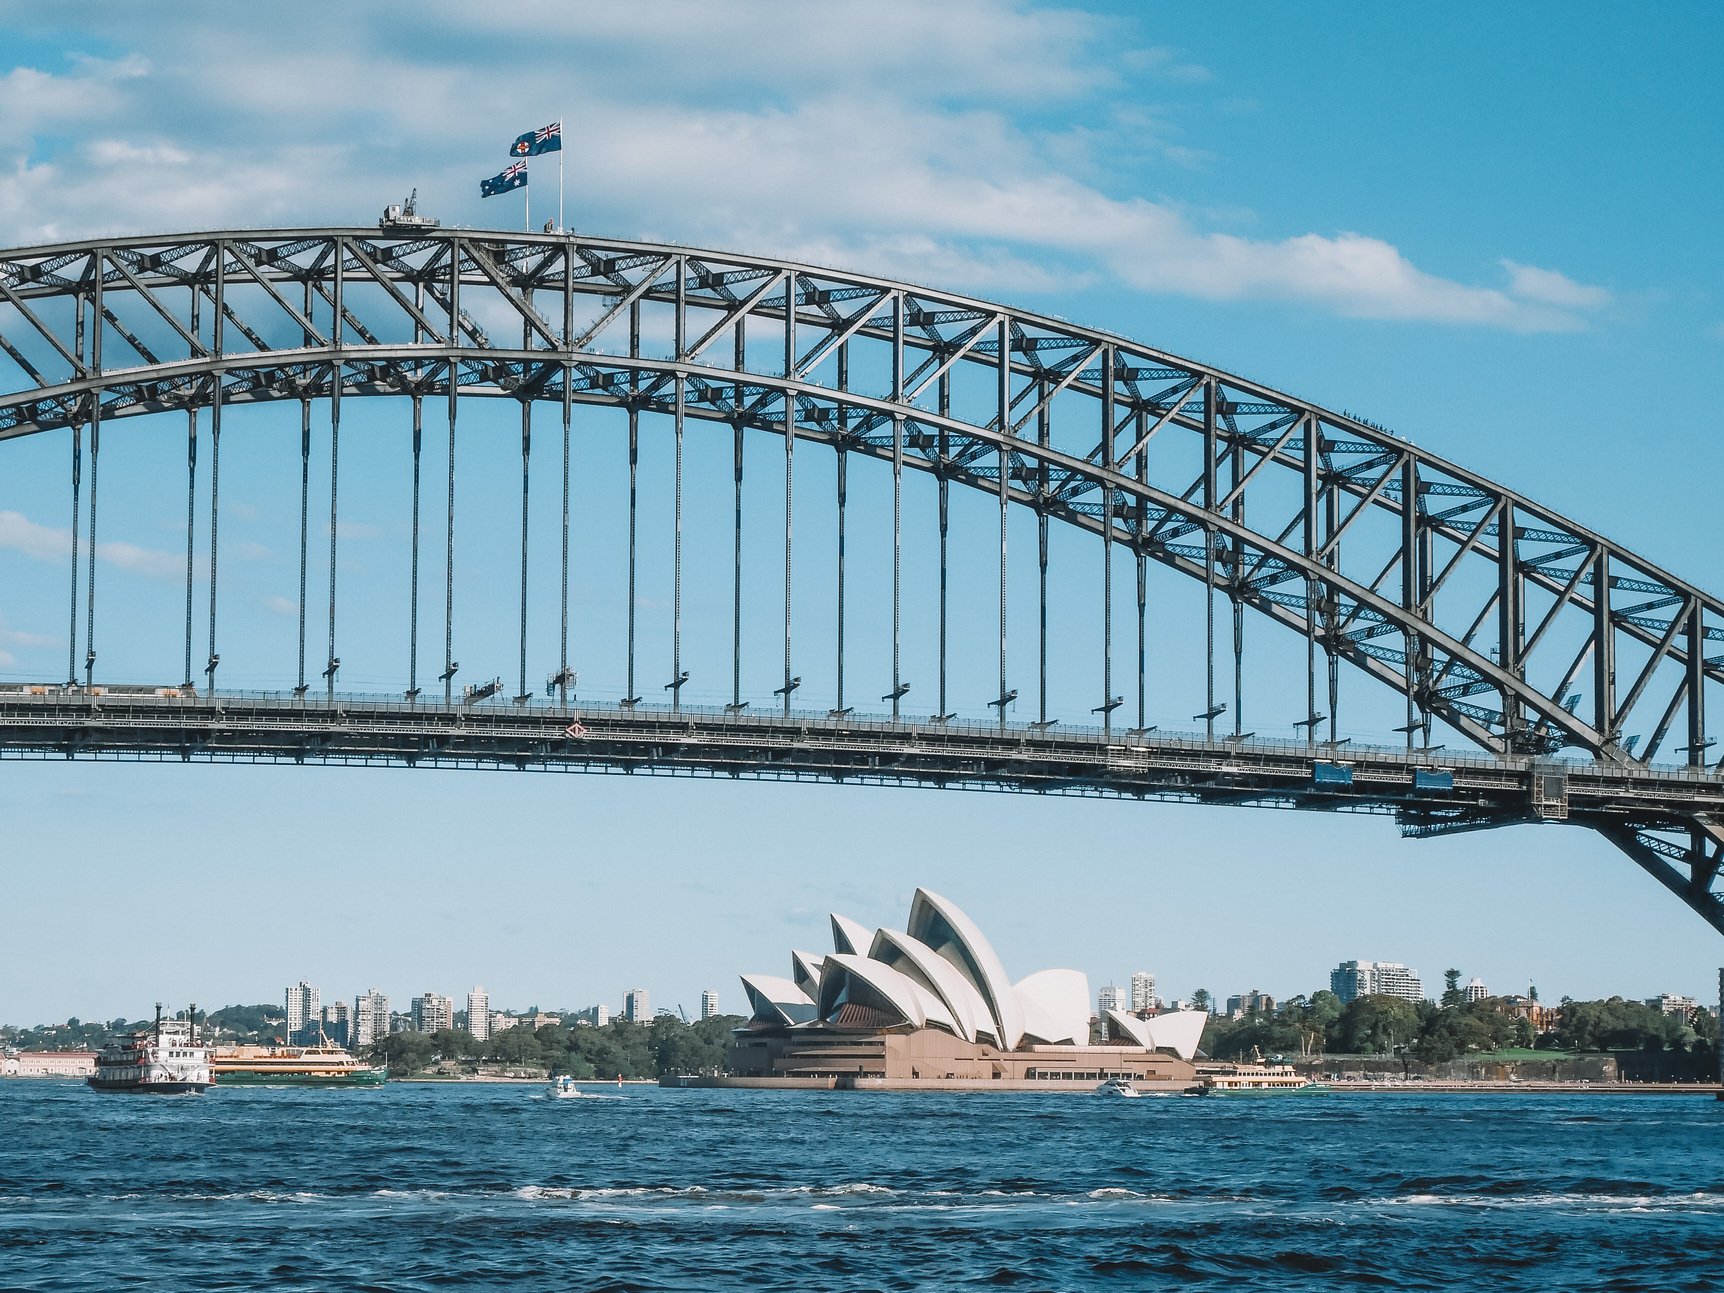 Harbour Bridge and the Opera House in the backgroudn - Sydney - New South Wales (NSW) - Australia